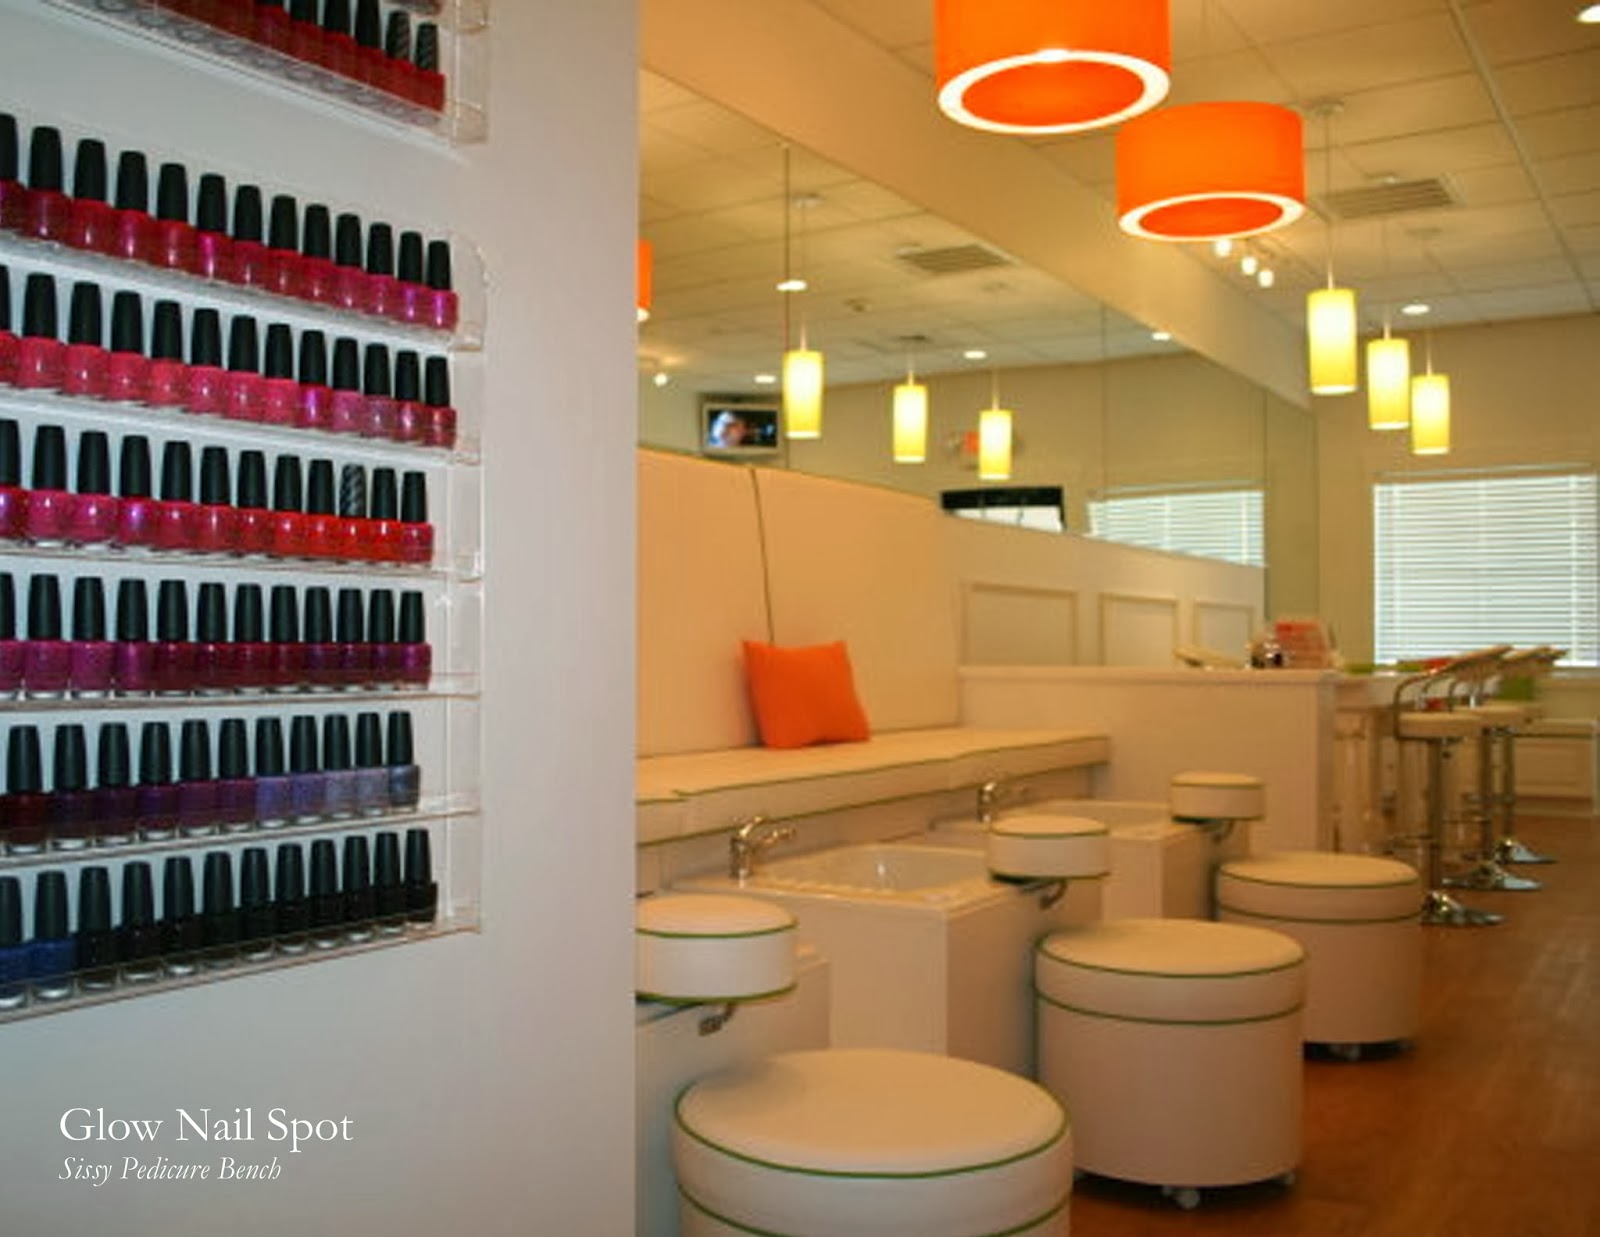 Nail Spa Design Choice Image Easy Nail Designs For Beginners Step